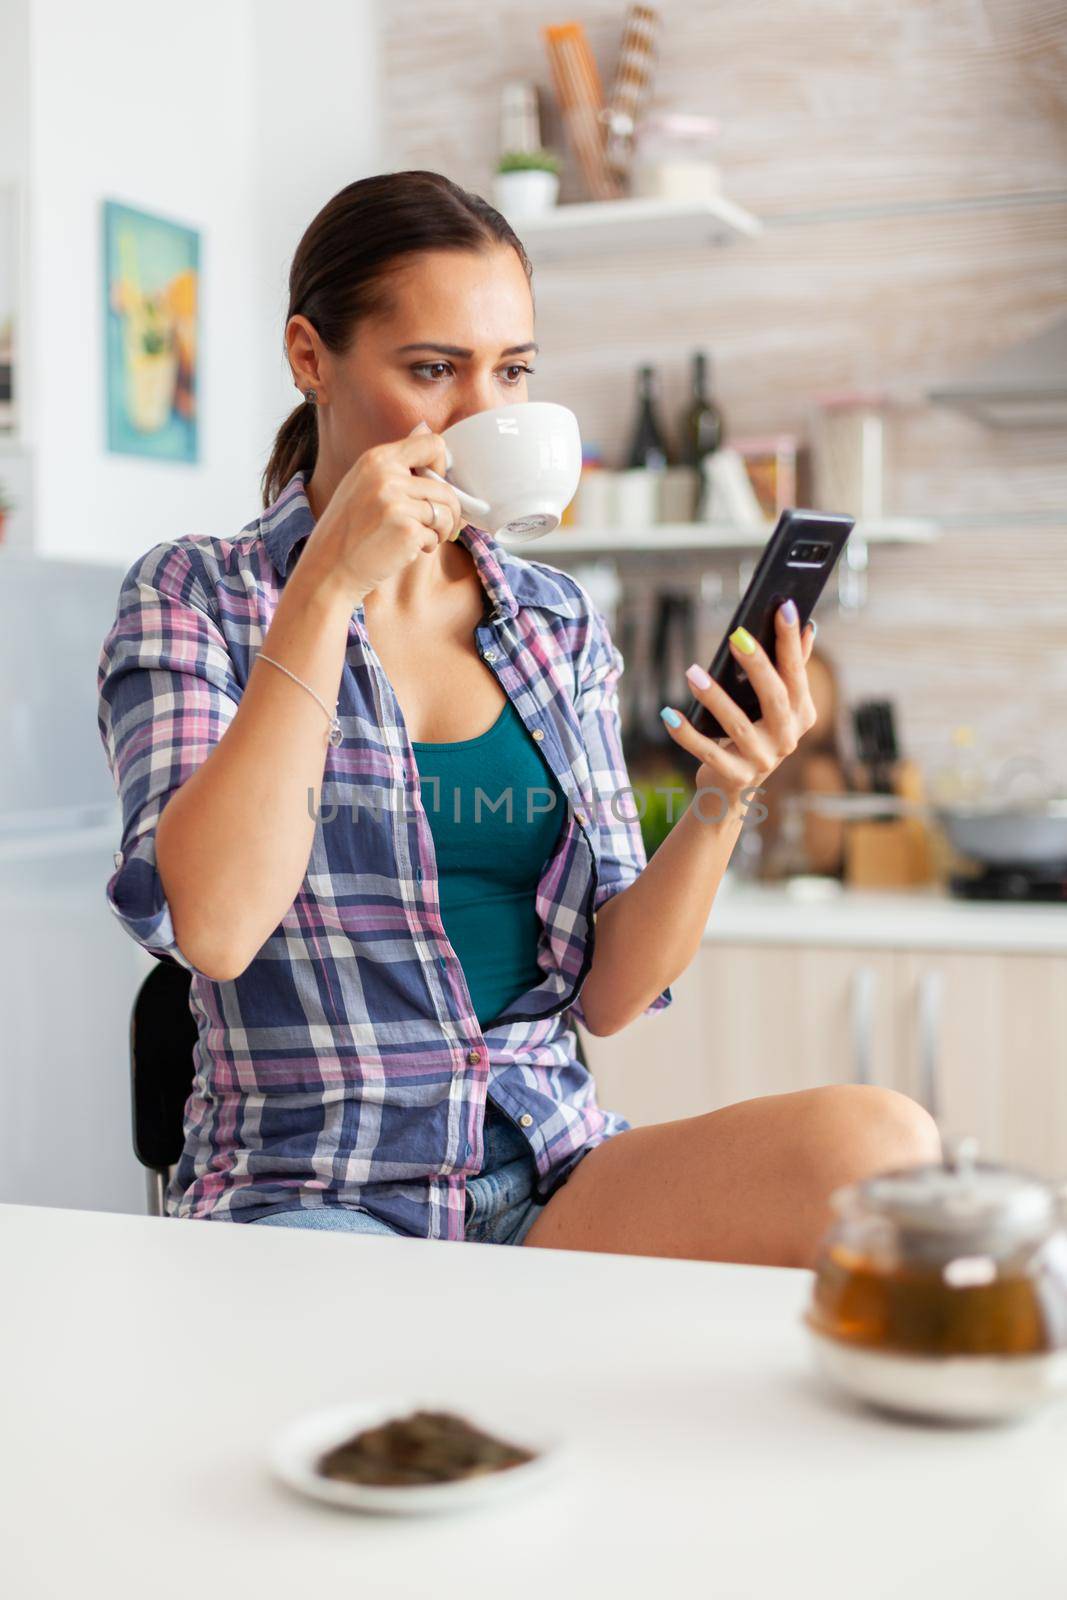 Housewife drinking hot green tea using smartphone in the morning during breakfast. Holding phone device with touchscreen using internet technology scrolling, searching on intelligent gadget.